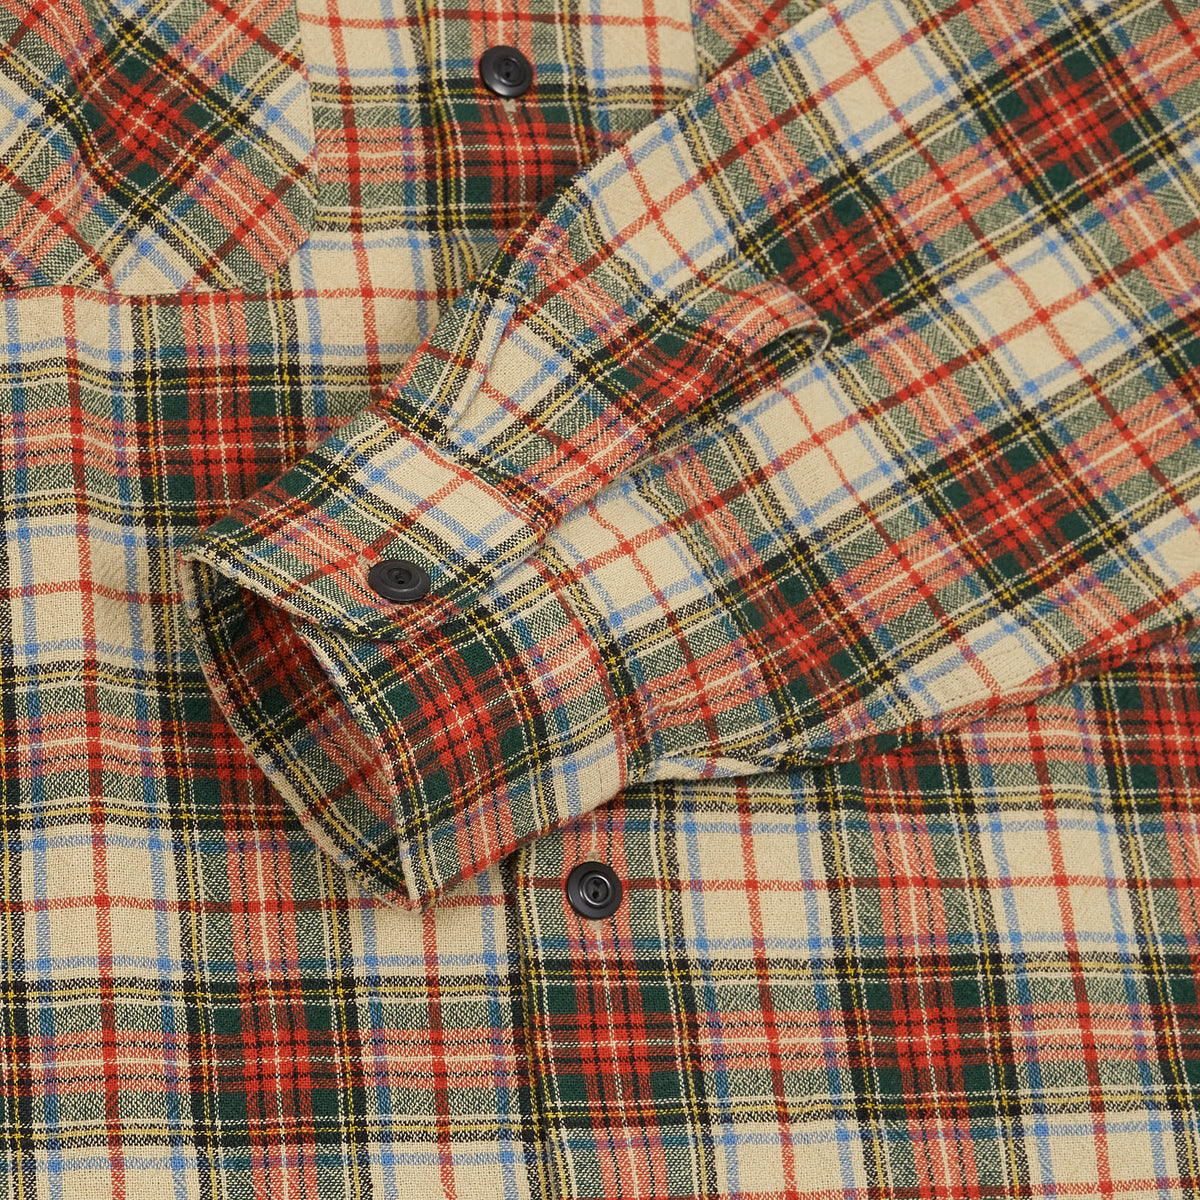 Double RL Country Plaid Multicolor Shirt